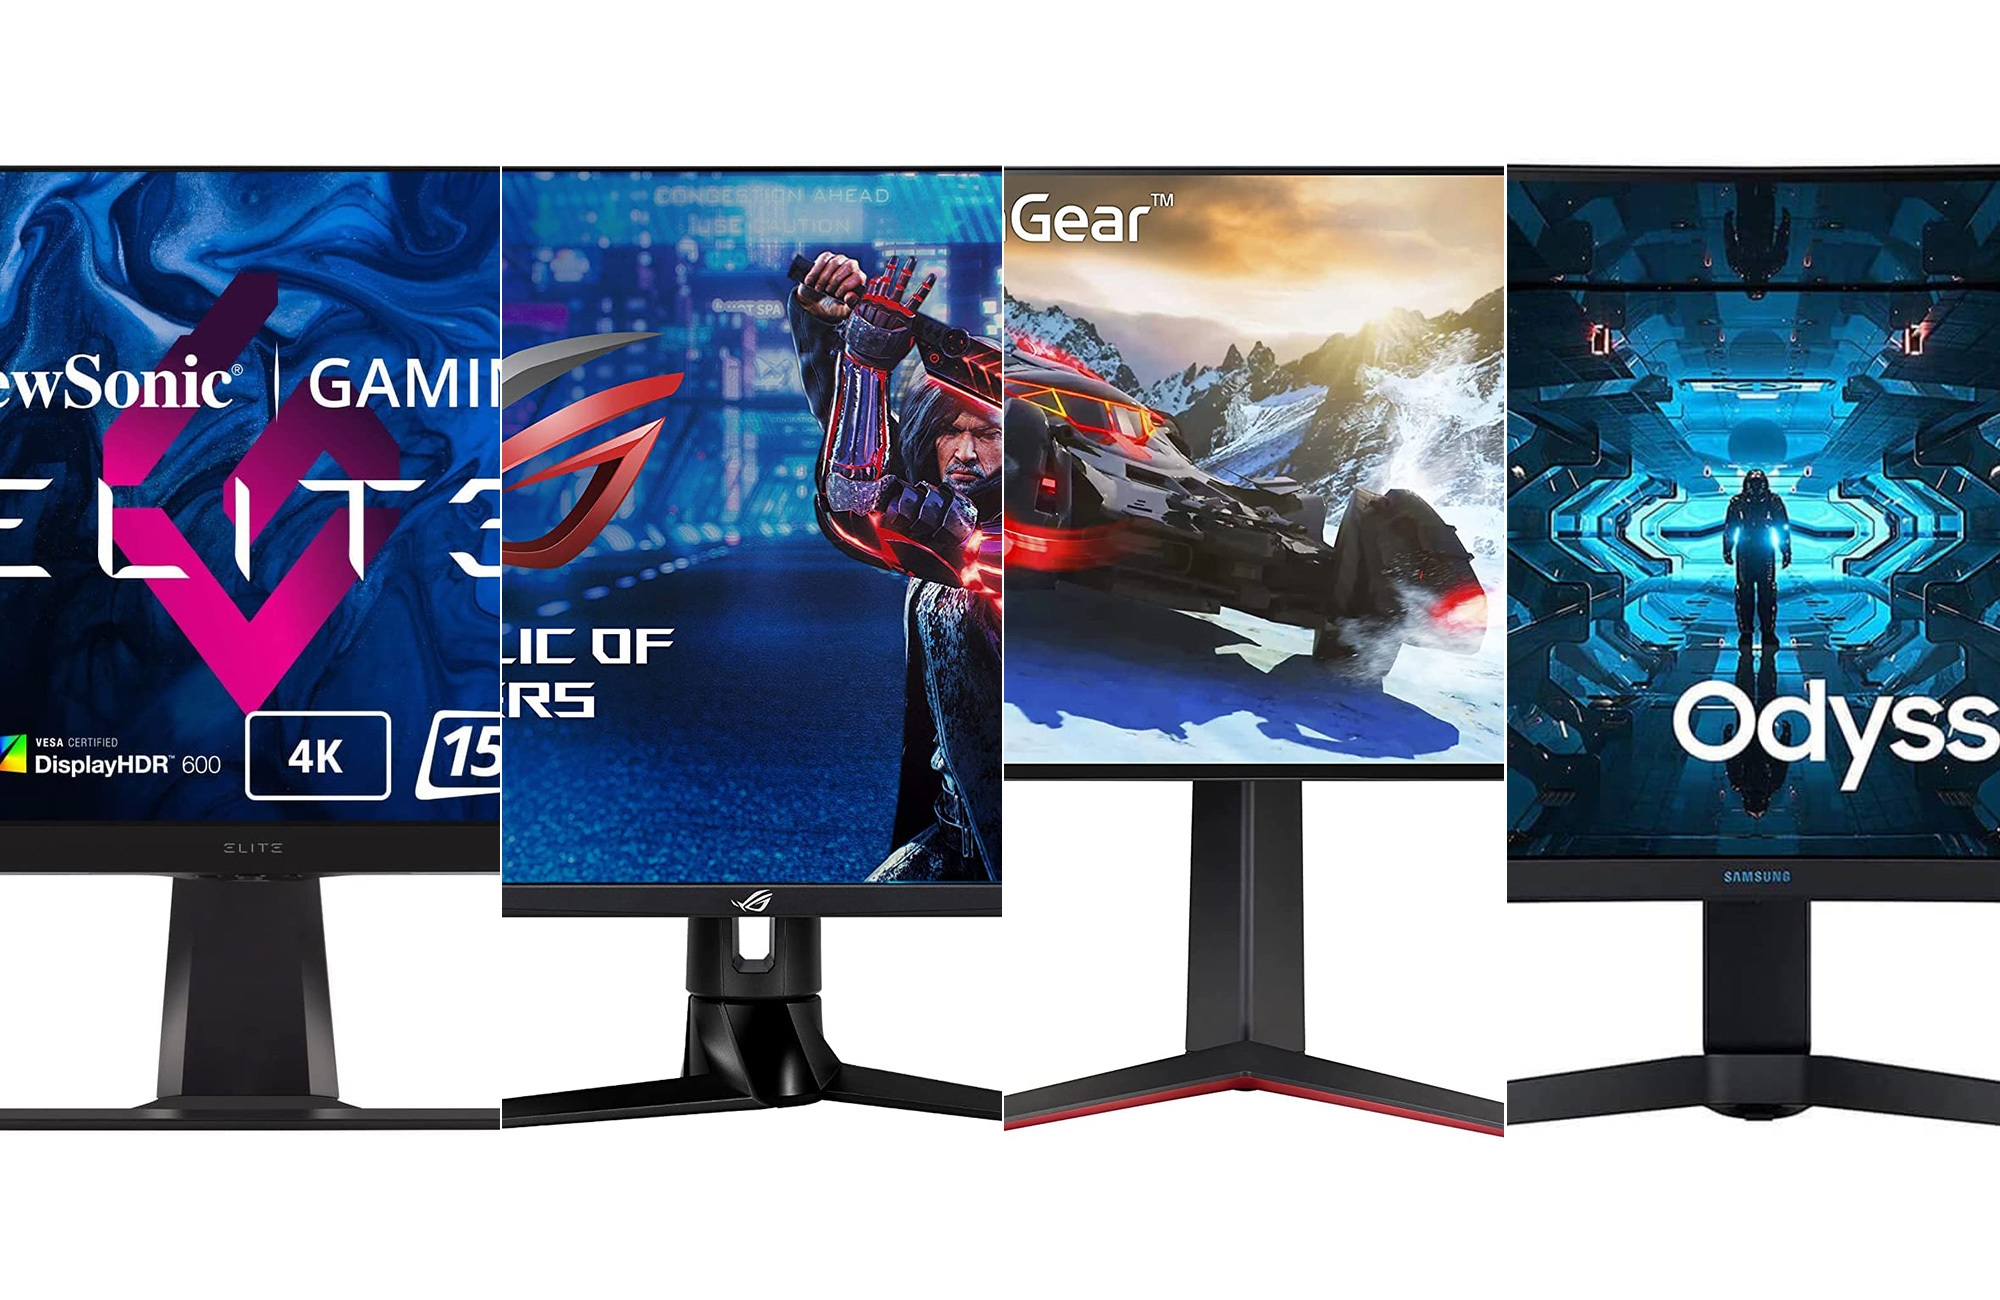 How to Get 4K 144Hz Gaming on a Monitor in 2022?